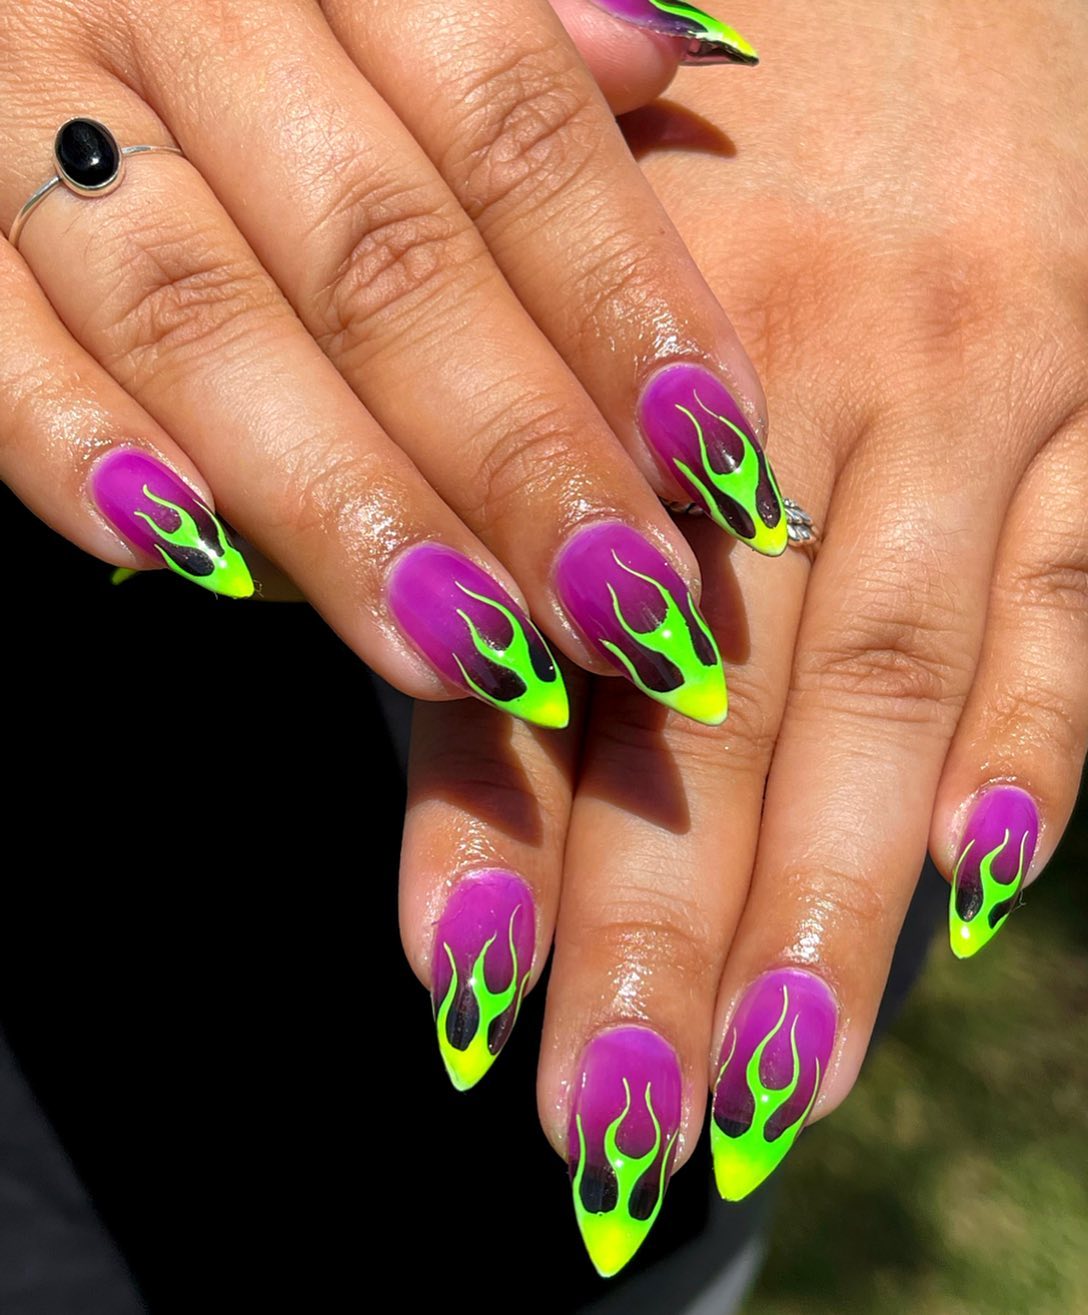 Ombre nails have always been a favorite manicure for many years and this time purple color gets darker to the tips above and it looks quite fabulous. To make it better, neon green flames should definitely be used. Go flame girl!